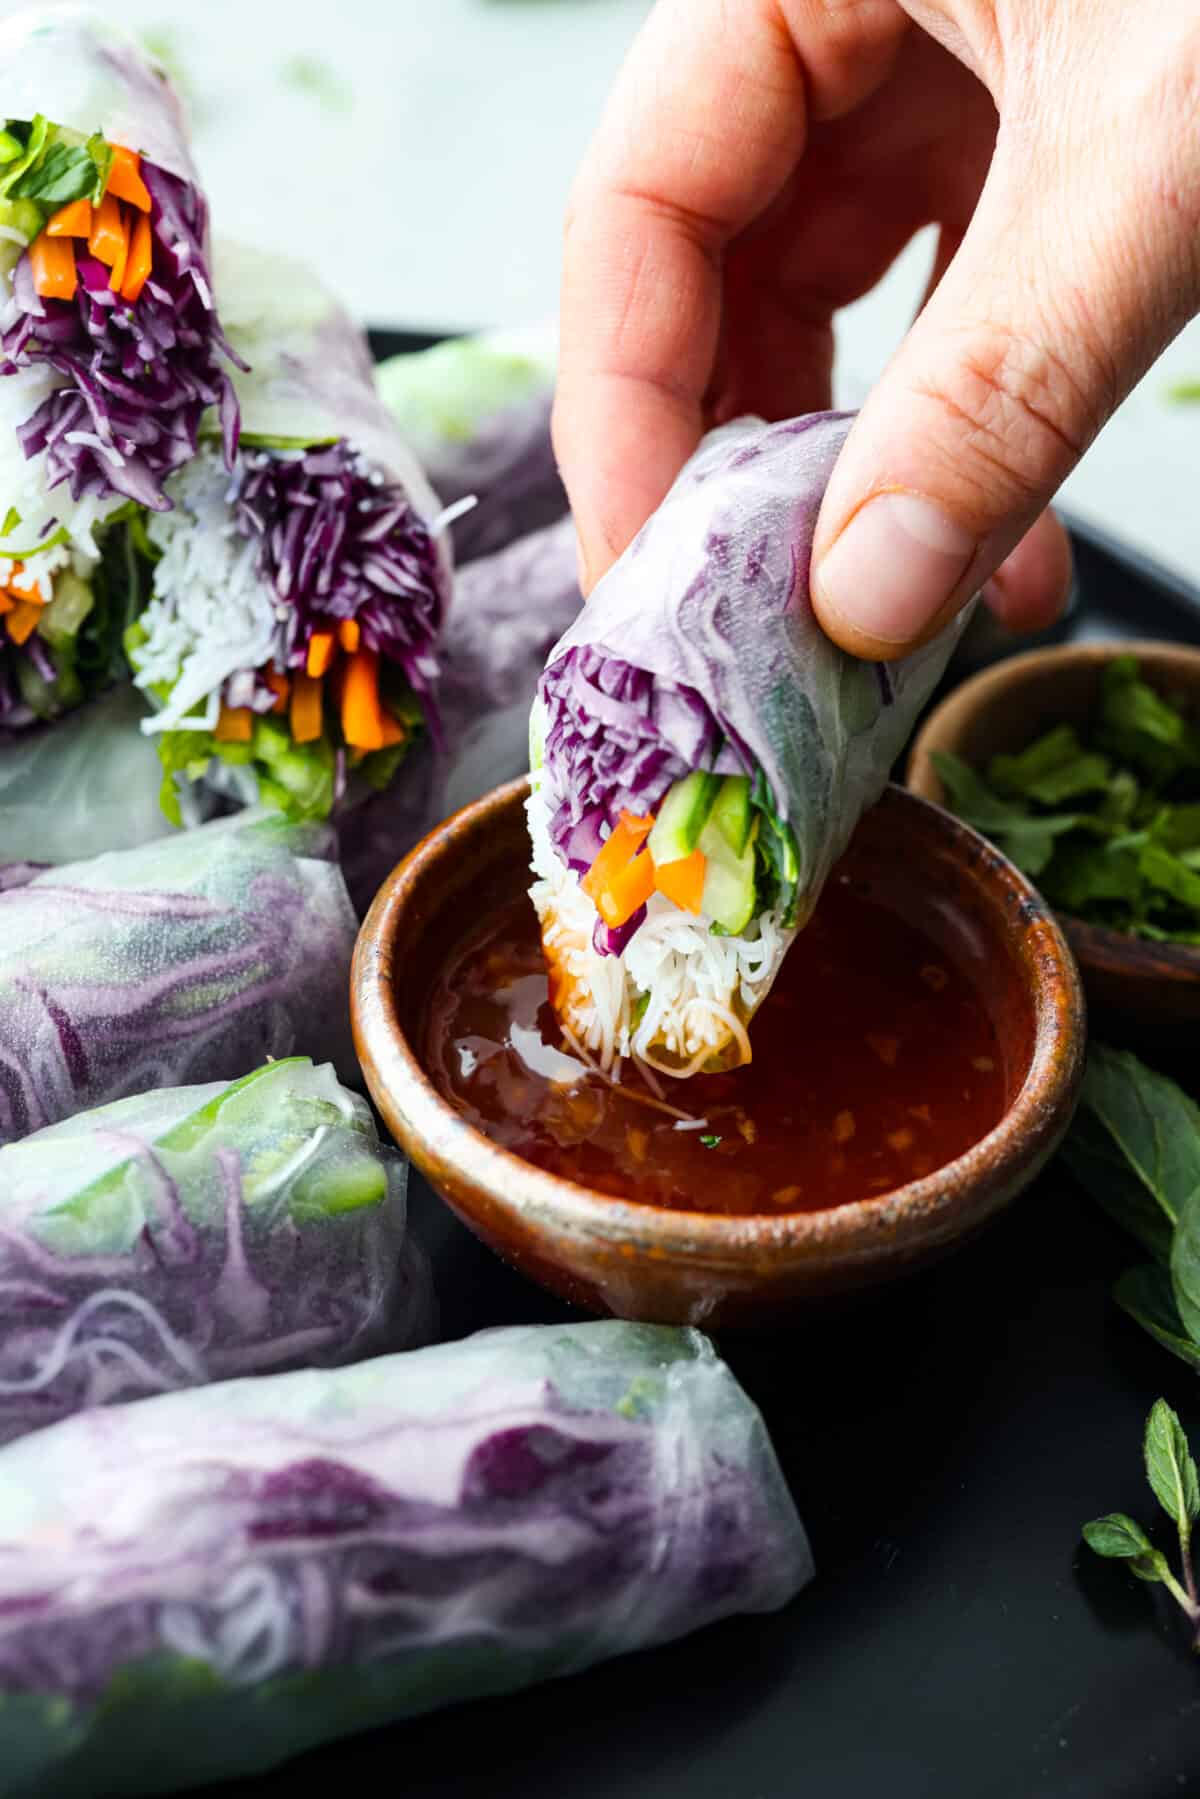 A spring roll being dipped into cili sauce. 